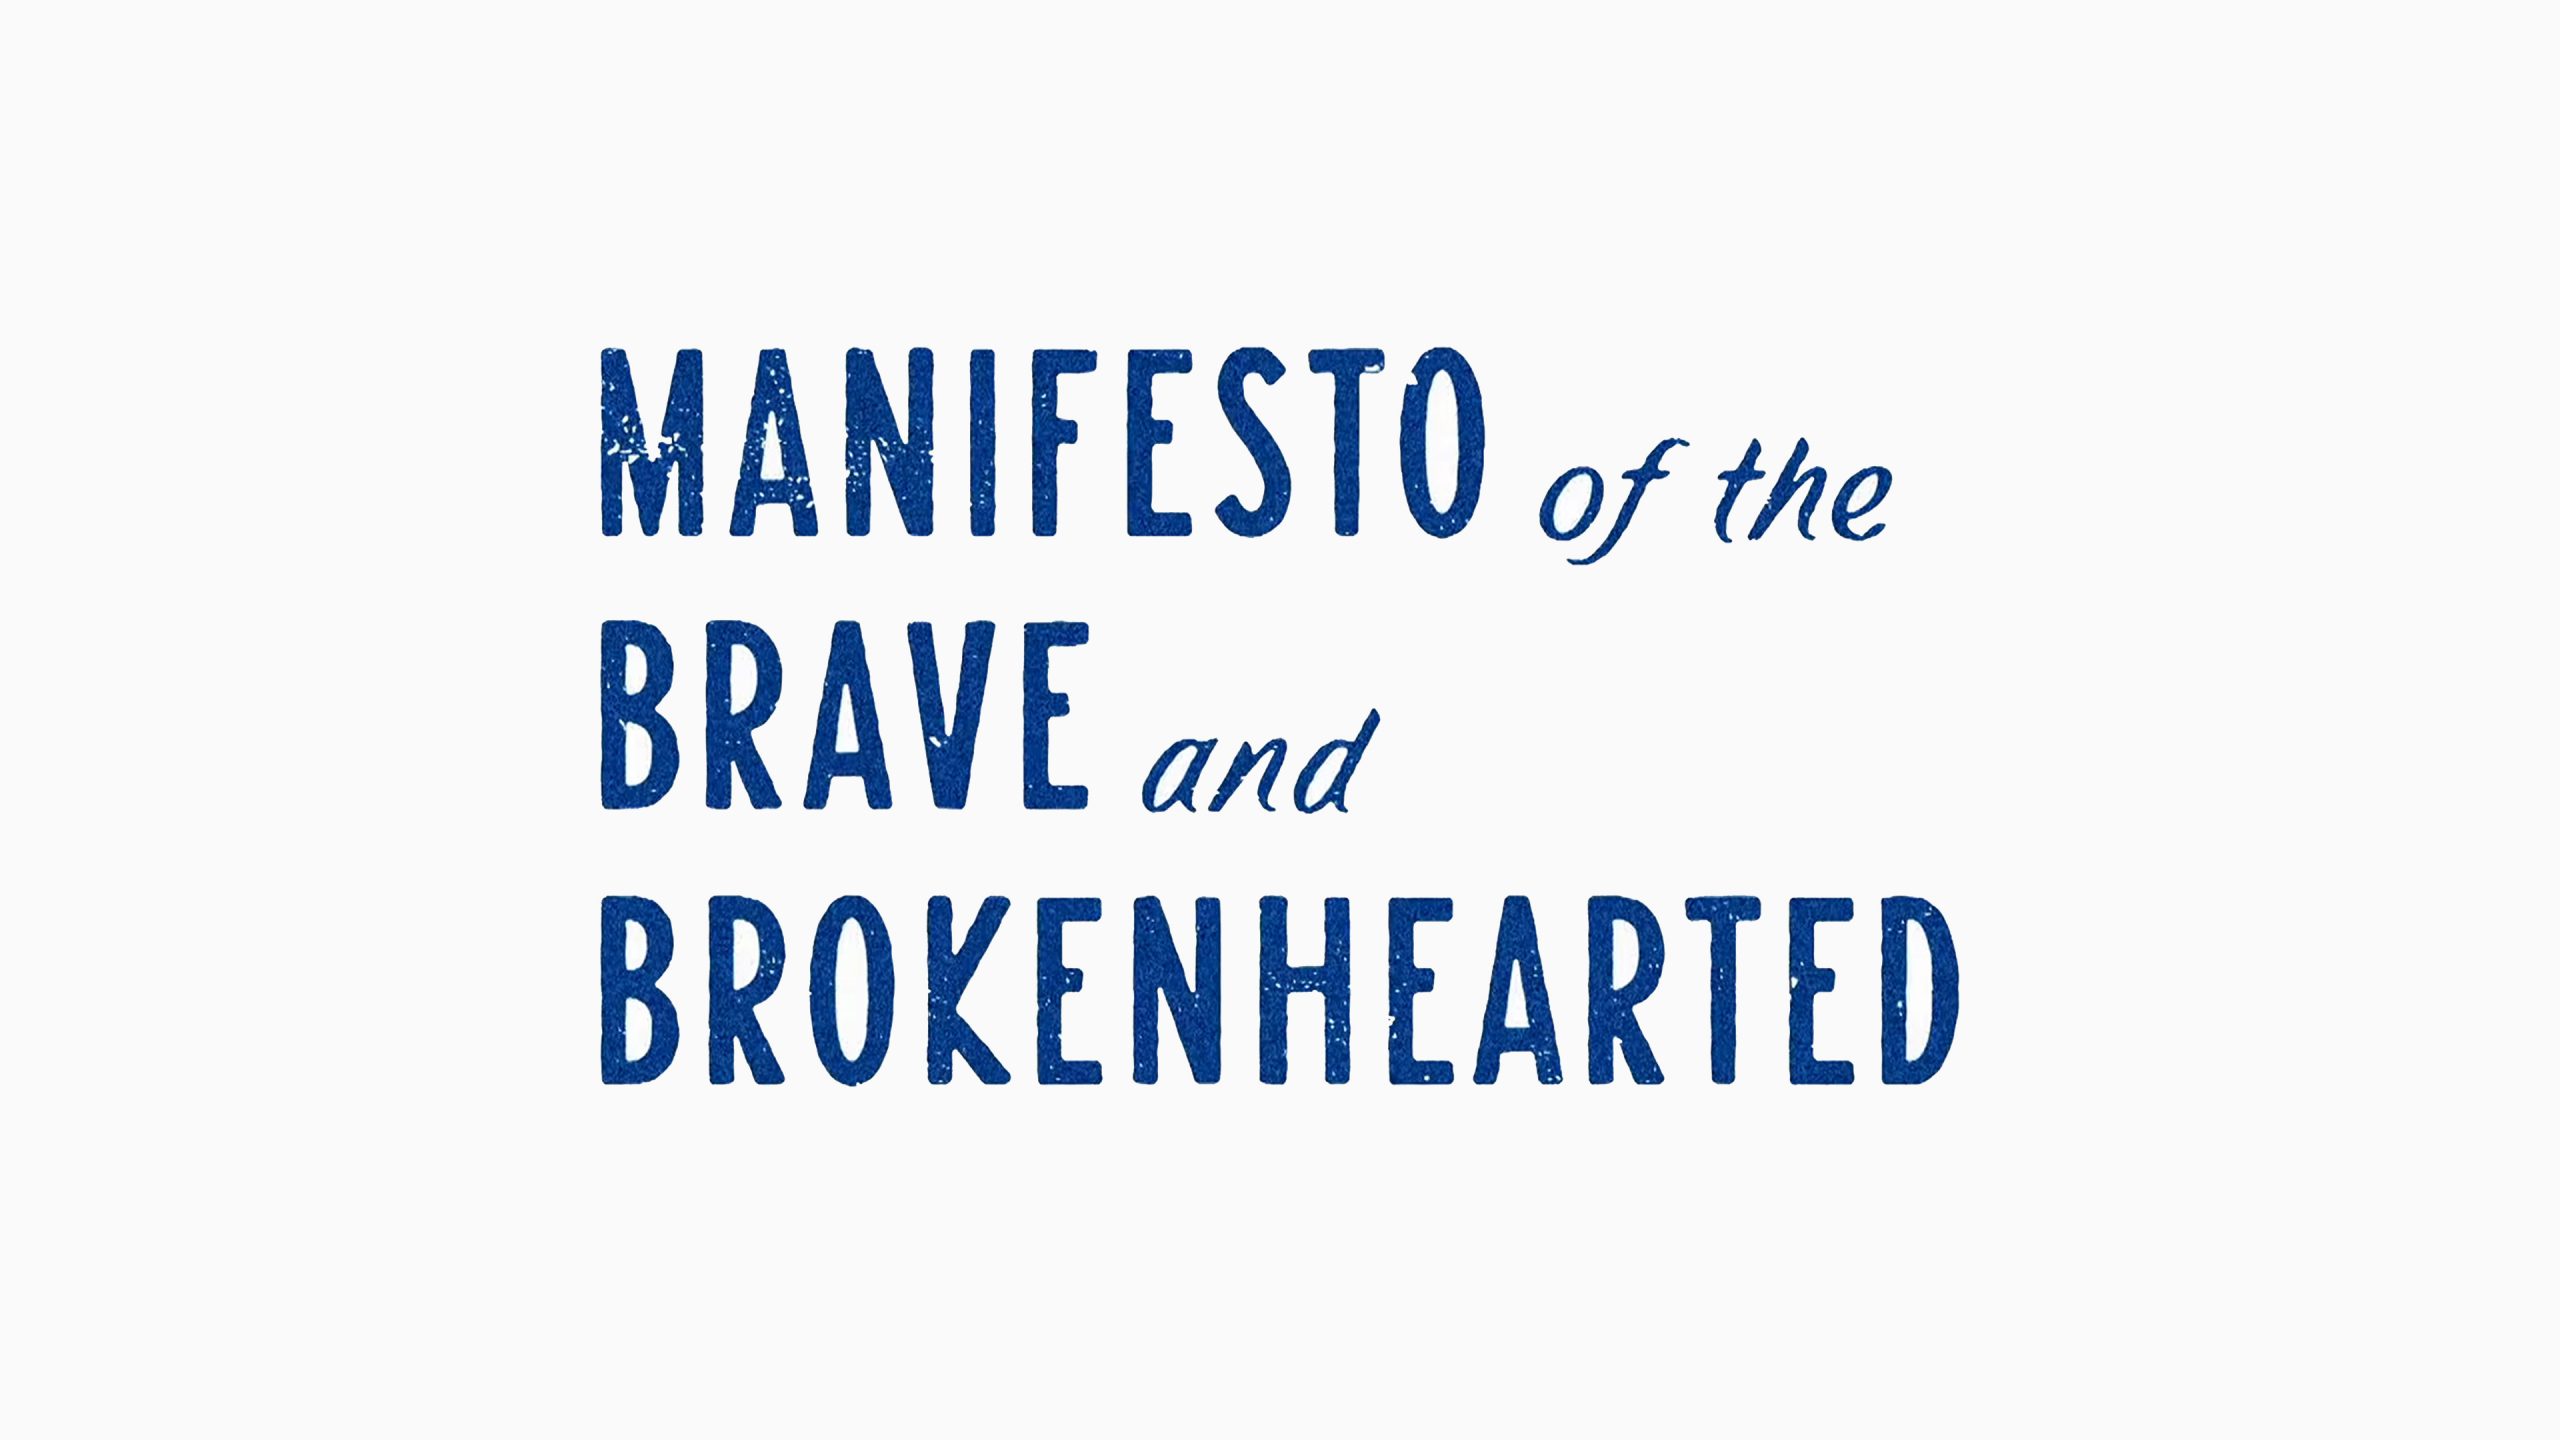 Rising Strong Manifesto of the Brave and Brokenhearted Video